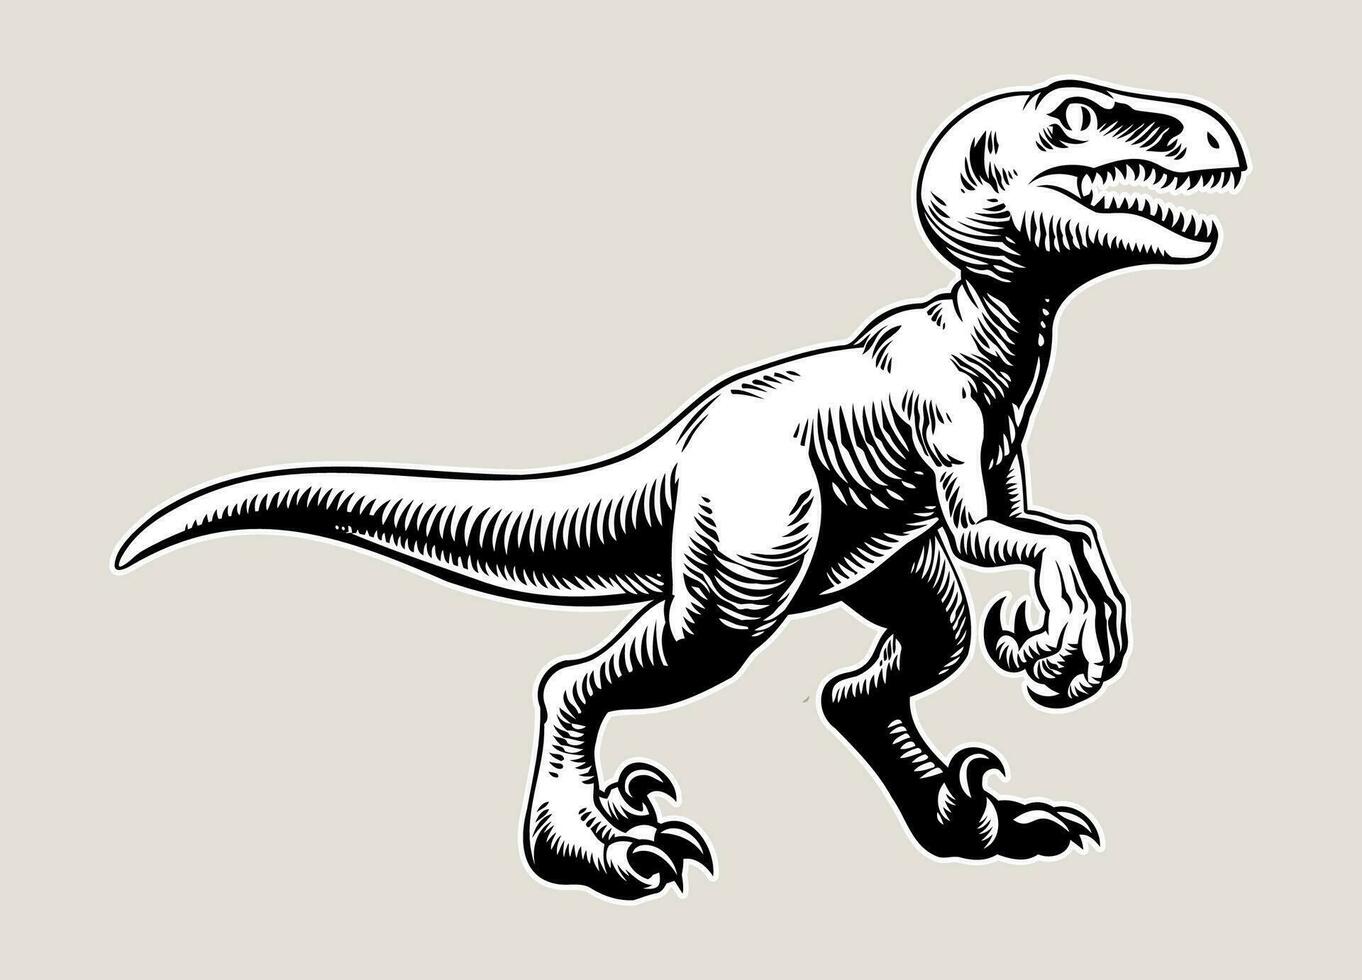 Hand Draw Raptor Illustration in White Background isolated vector